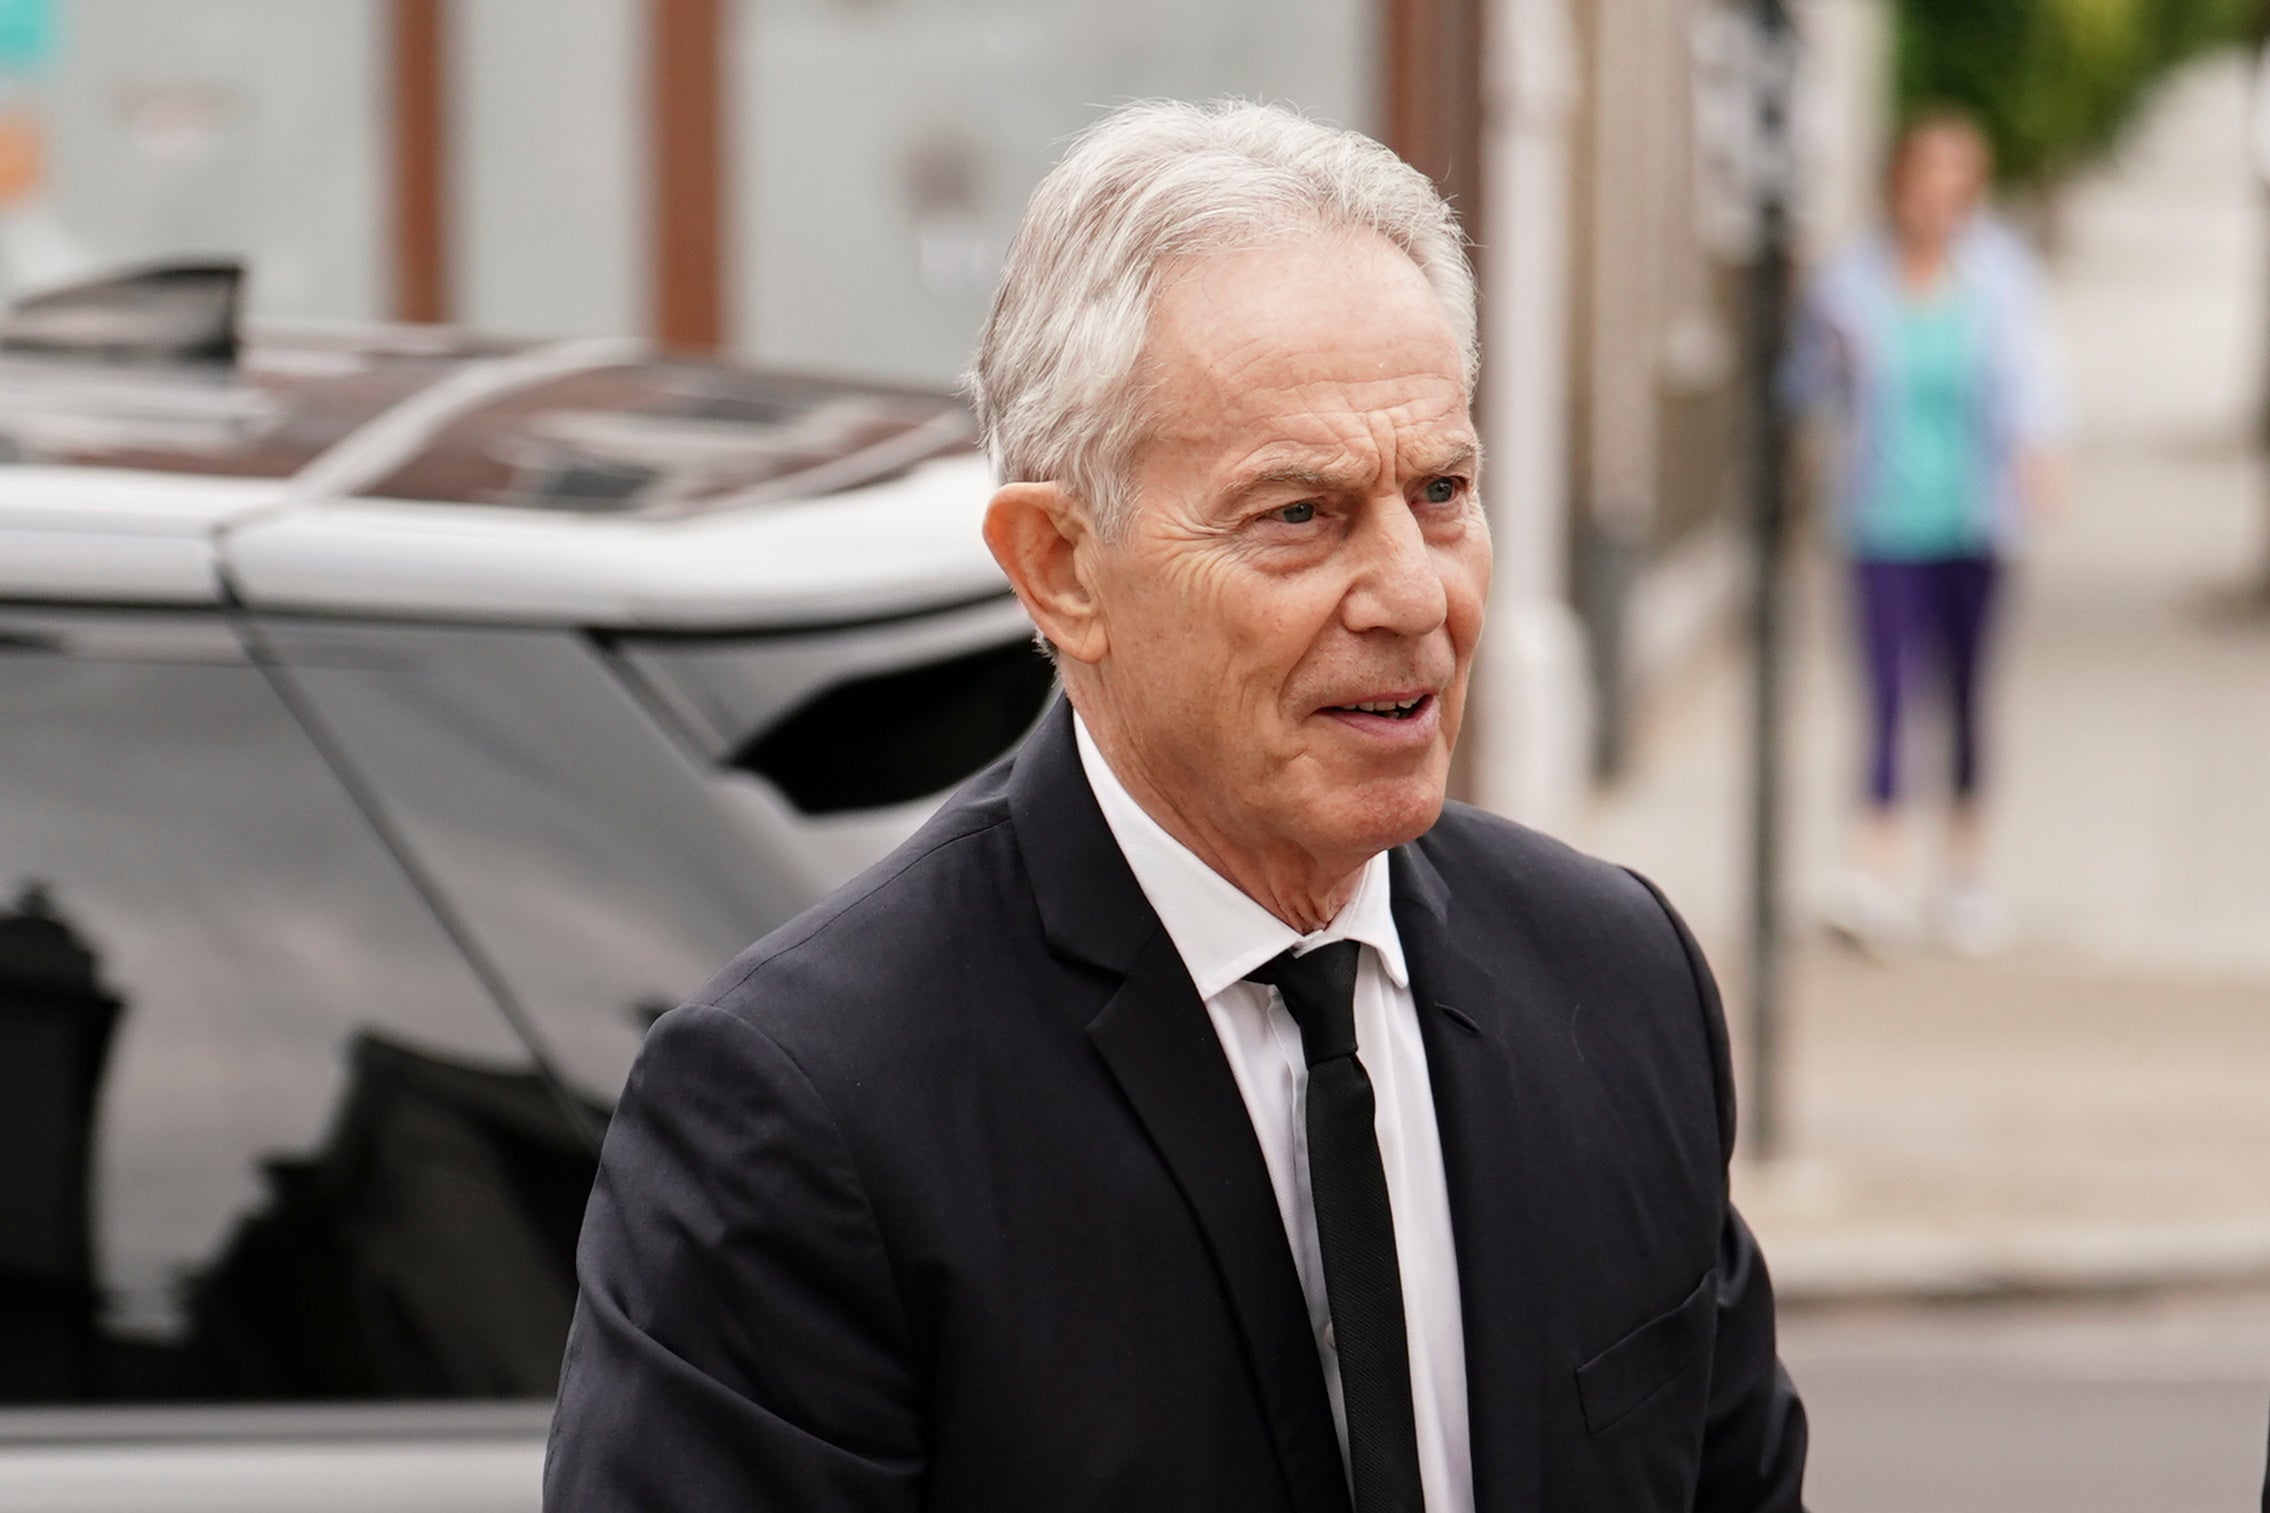 Tony Blair’s ambitious post-millennium goal to abolish child poverty achieved some notable but only temporary successes